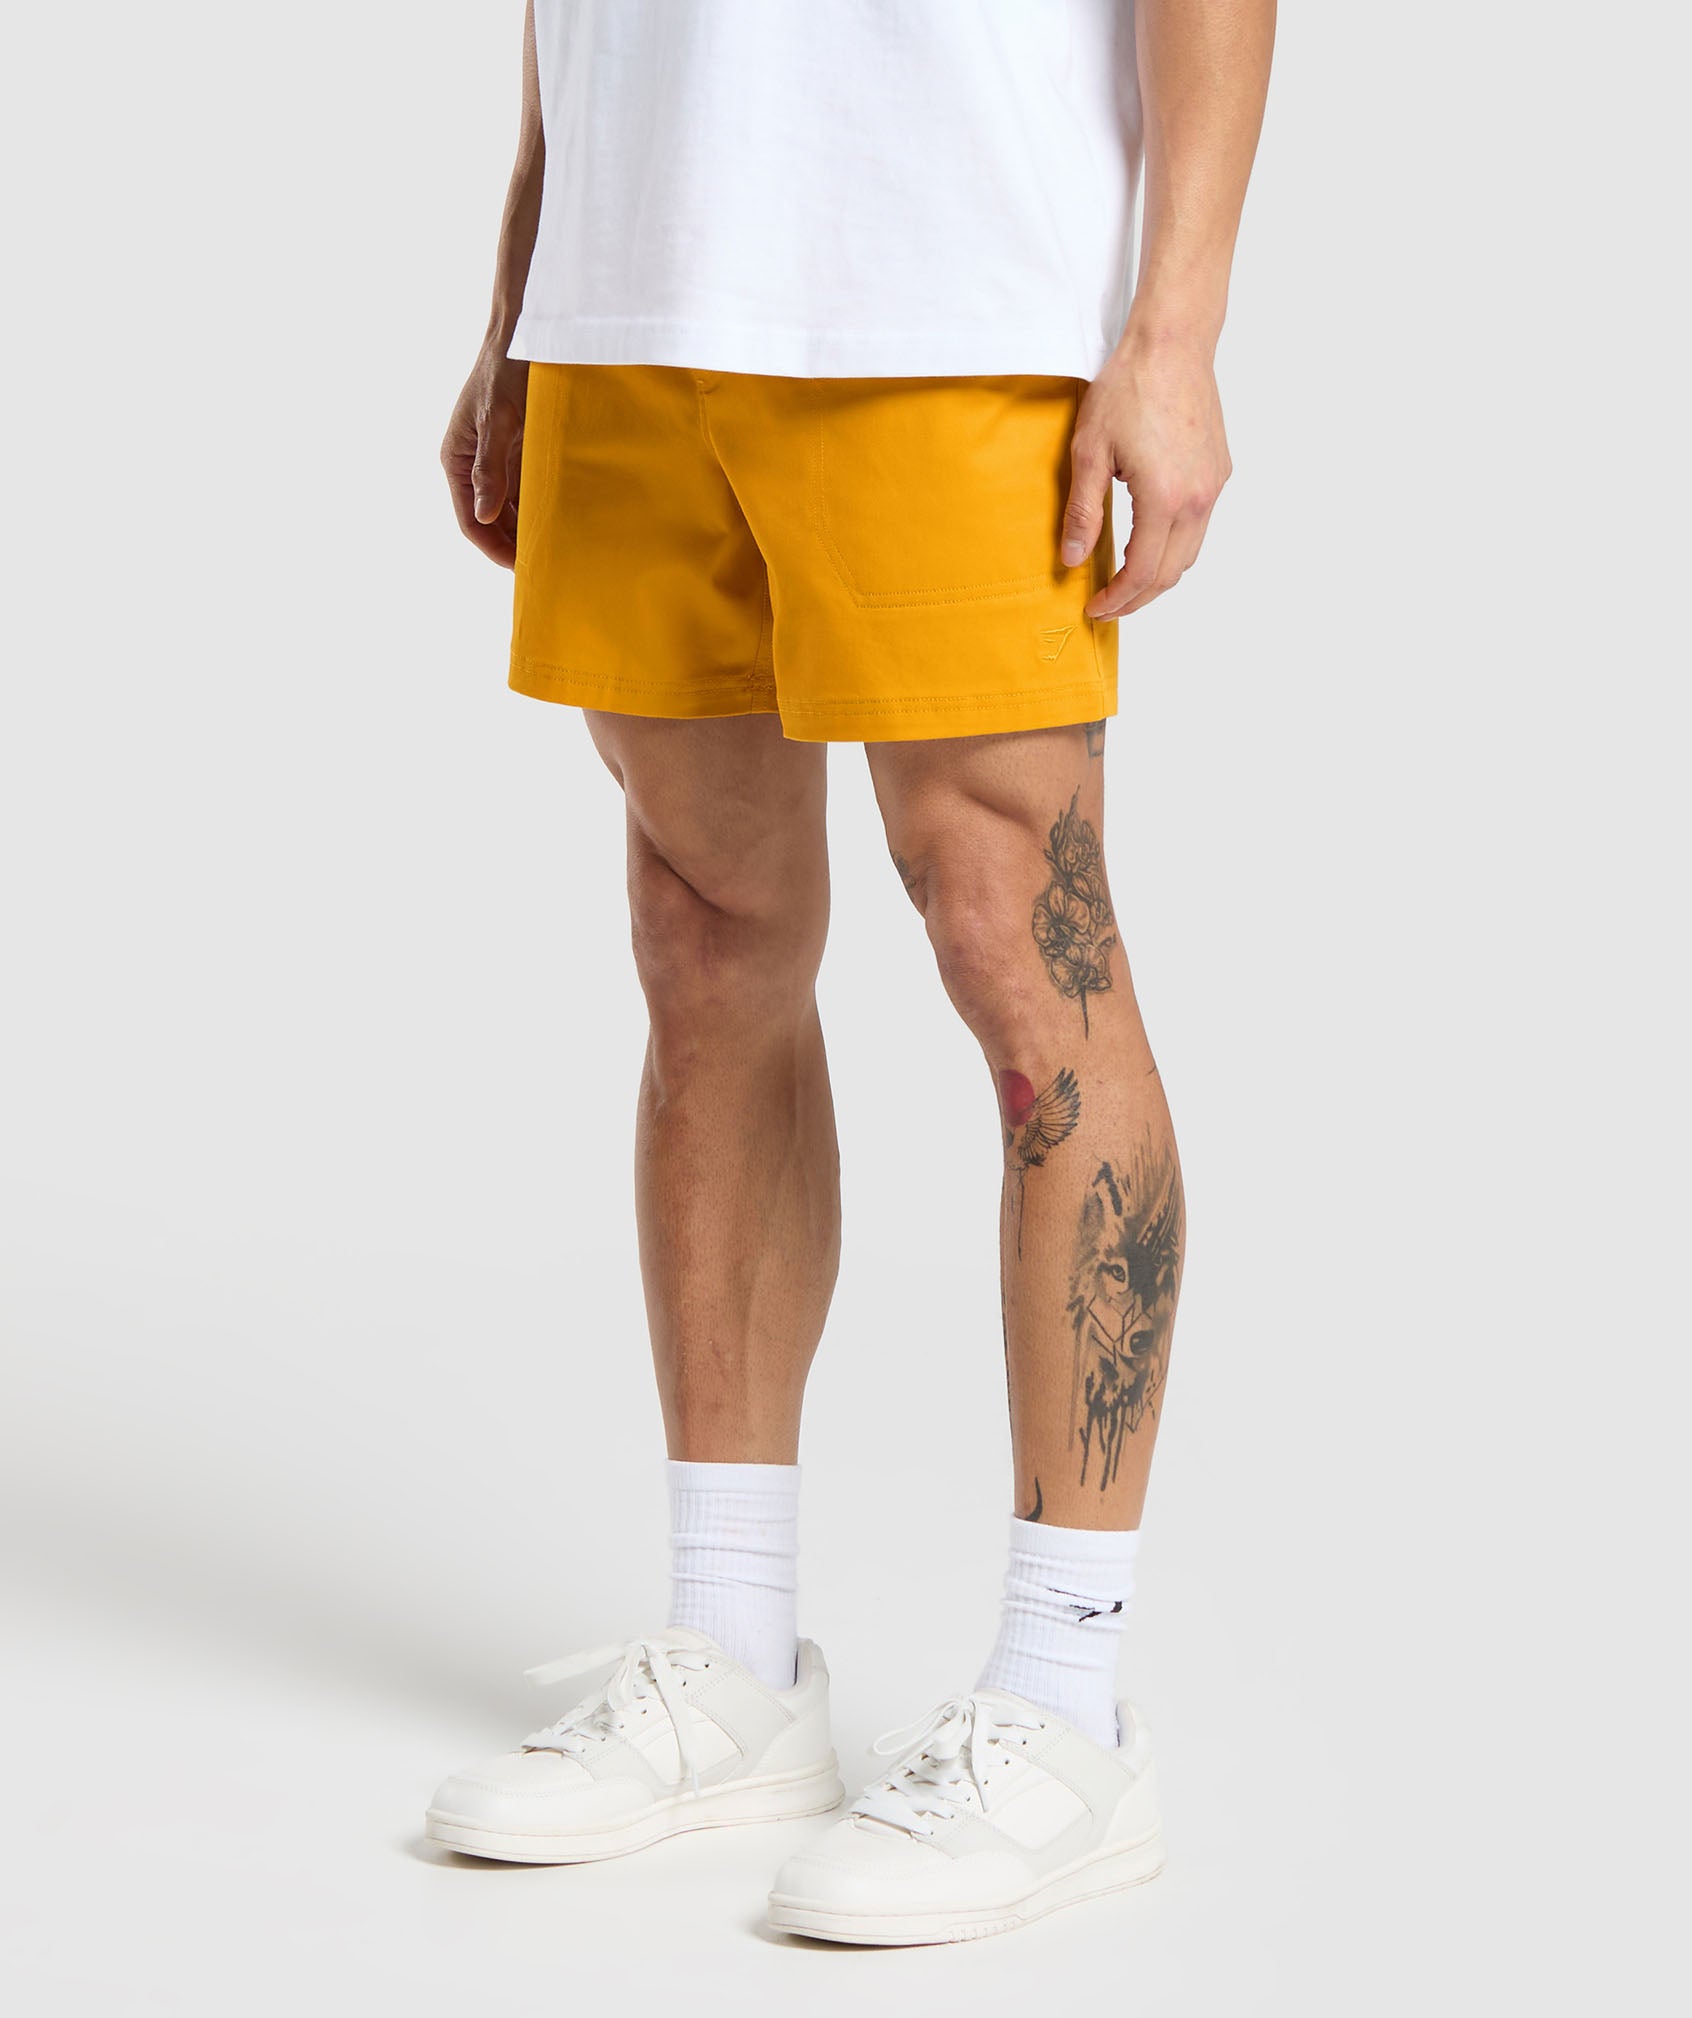 Rest Day Woven Shorts in Burnt Yellow - view 3